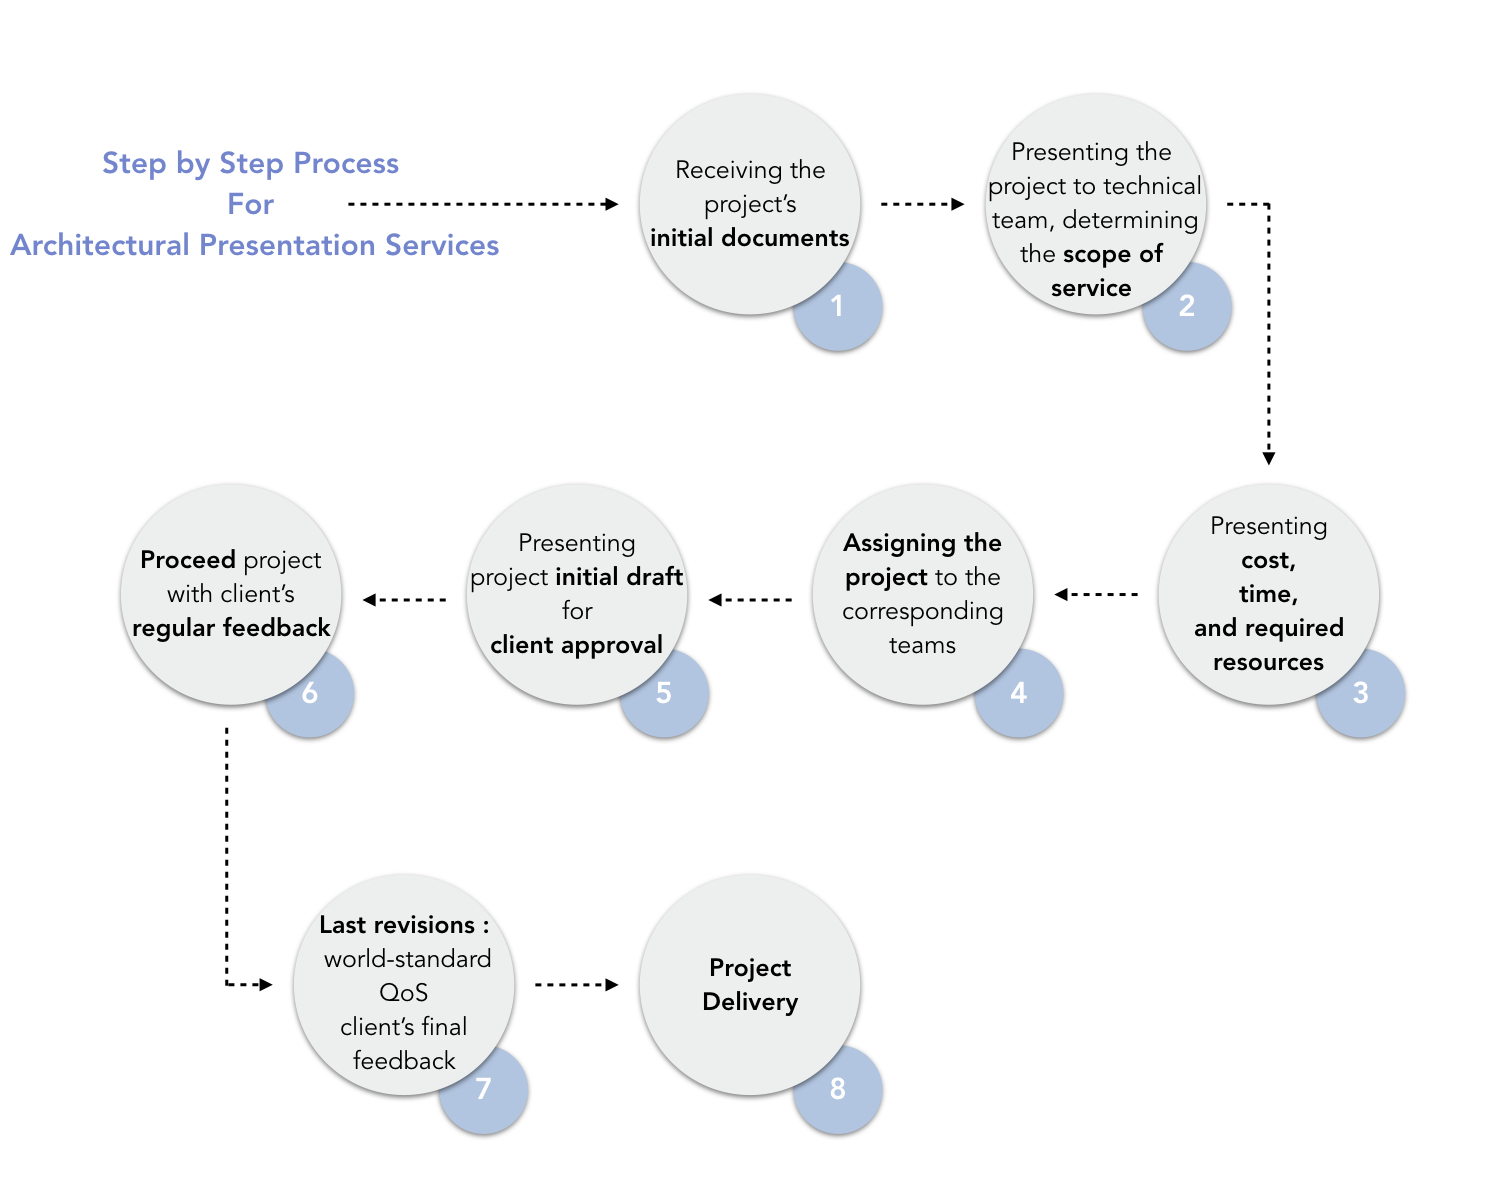 The Step by Step Process Diagram for Architectural Plan Services